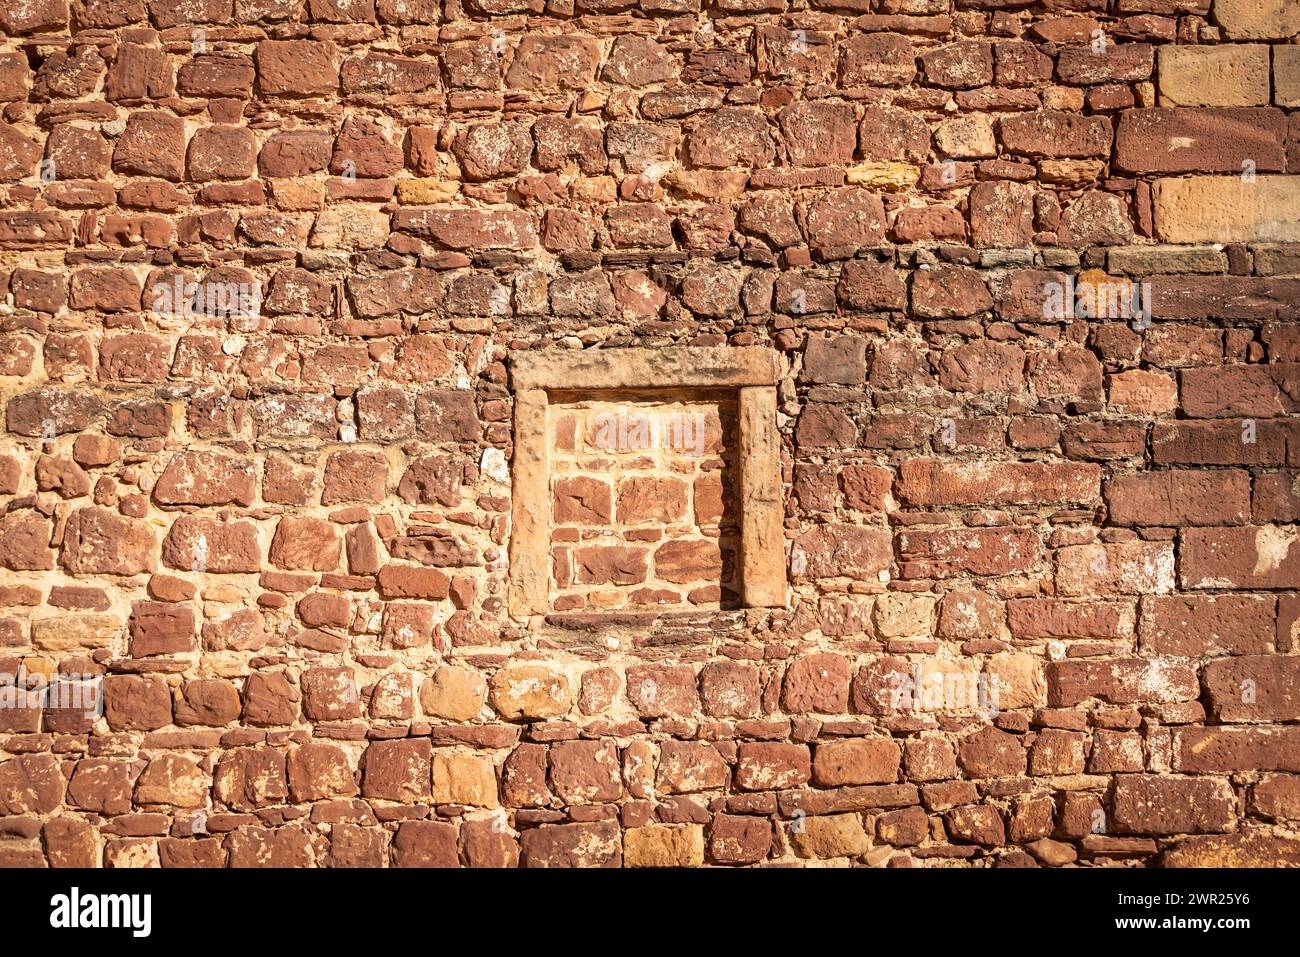 old red stone and brick wall, historical building Stock Photo